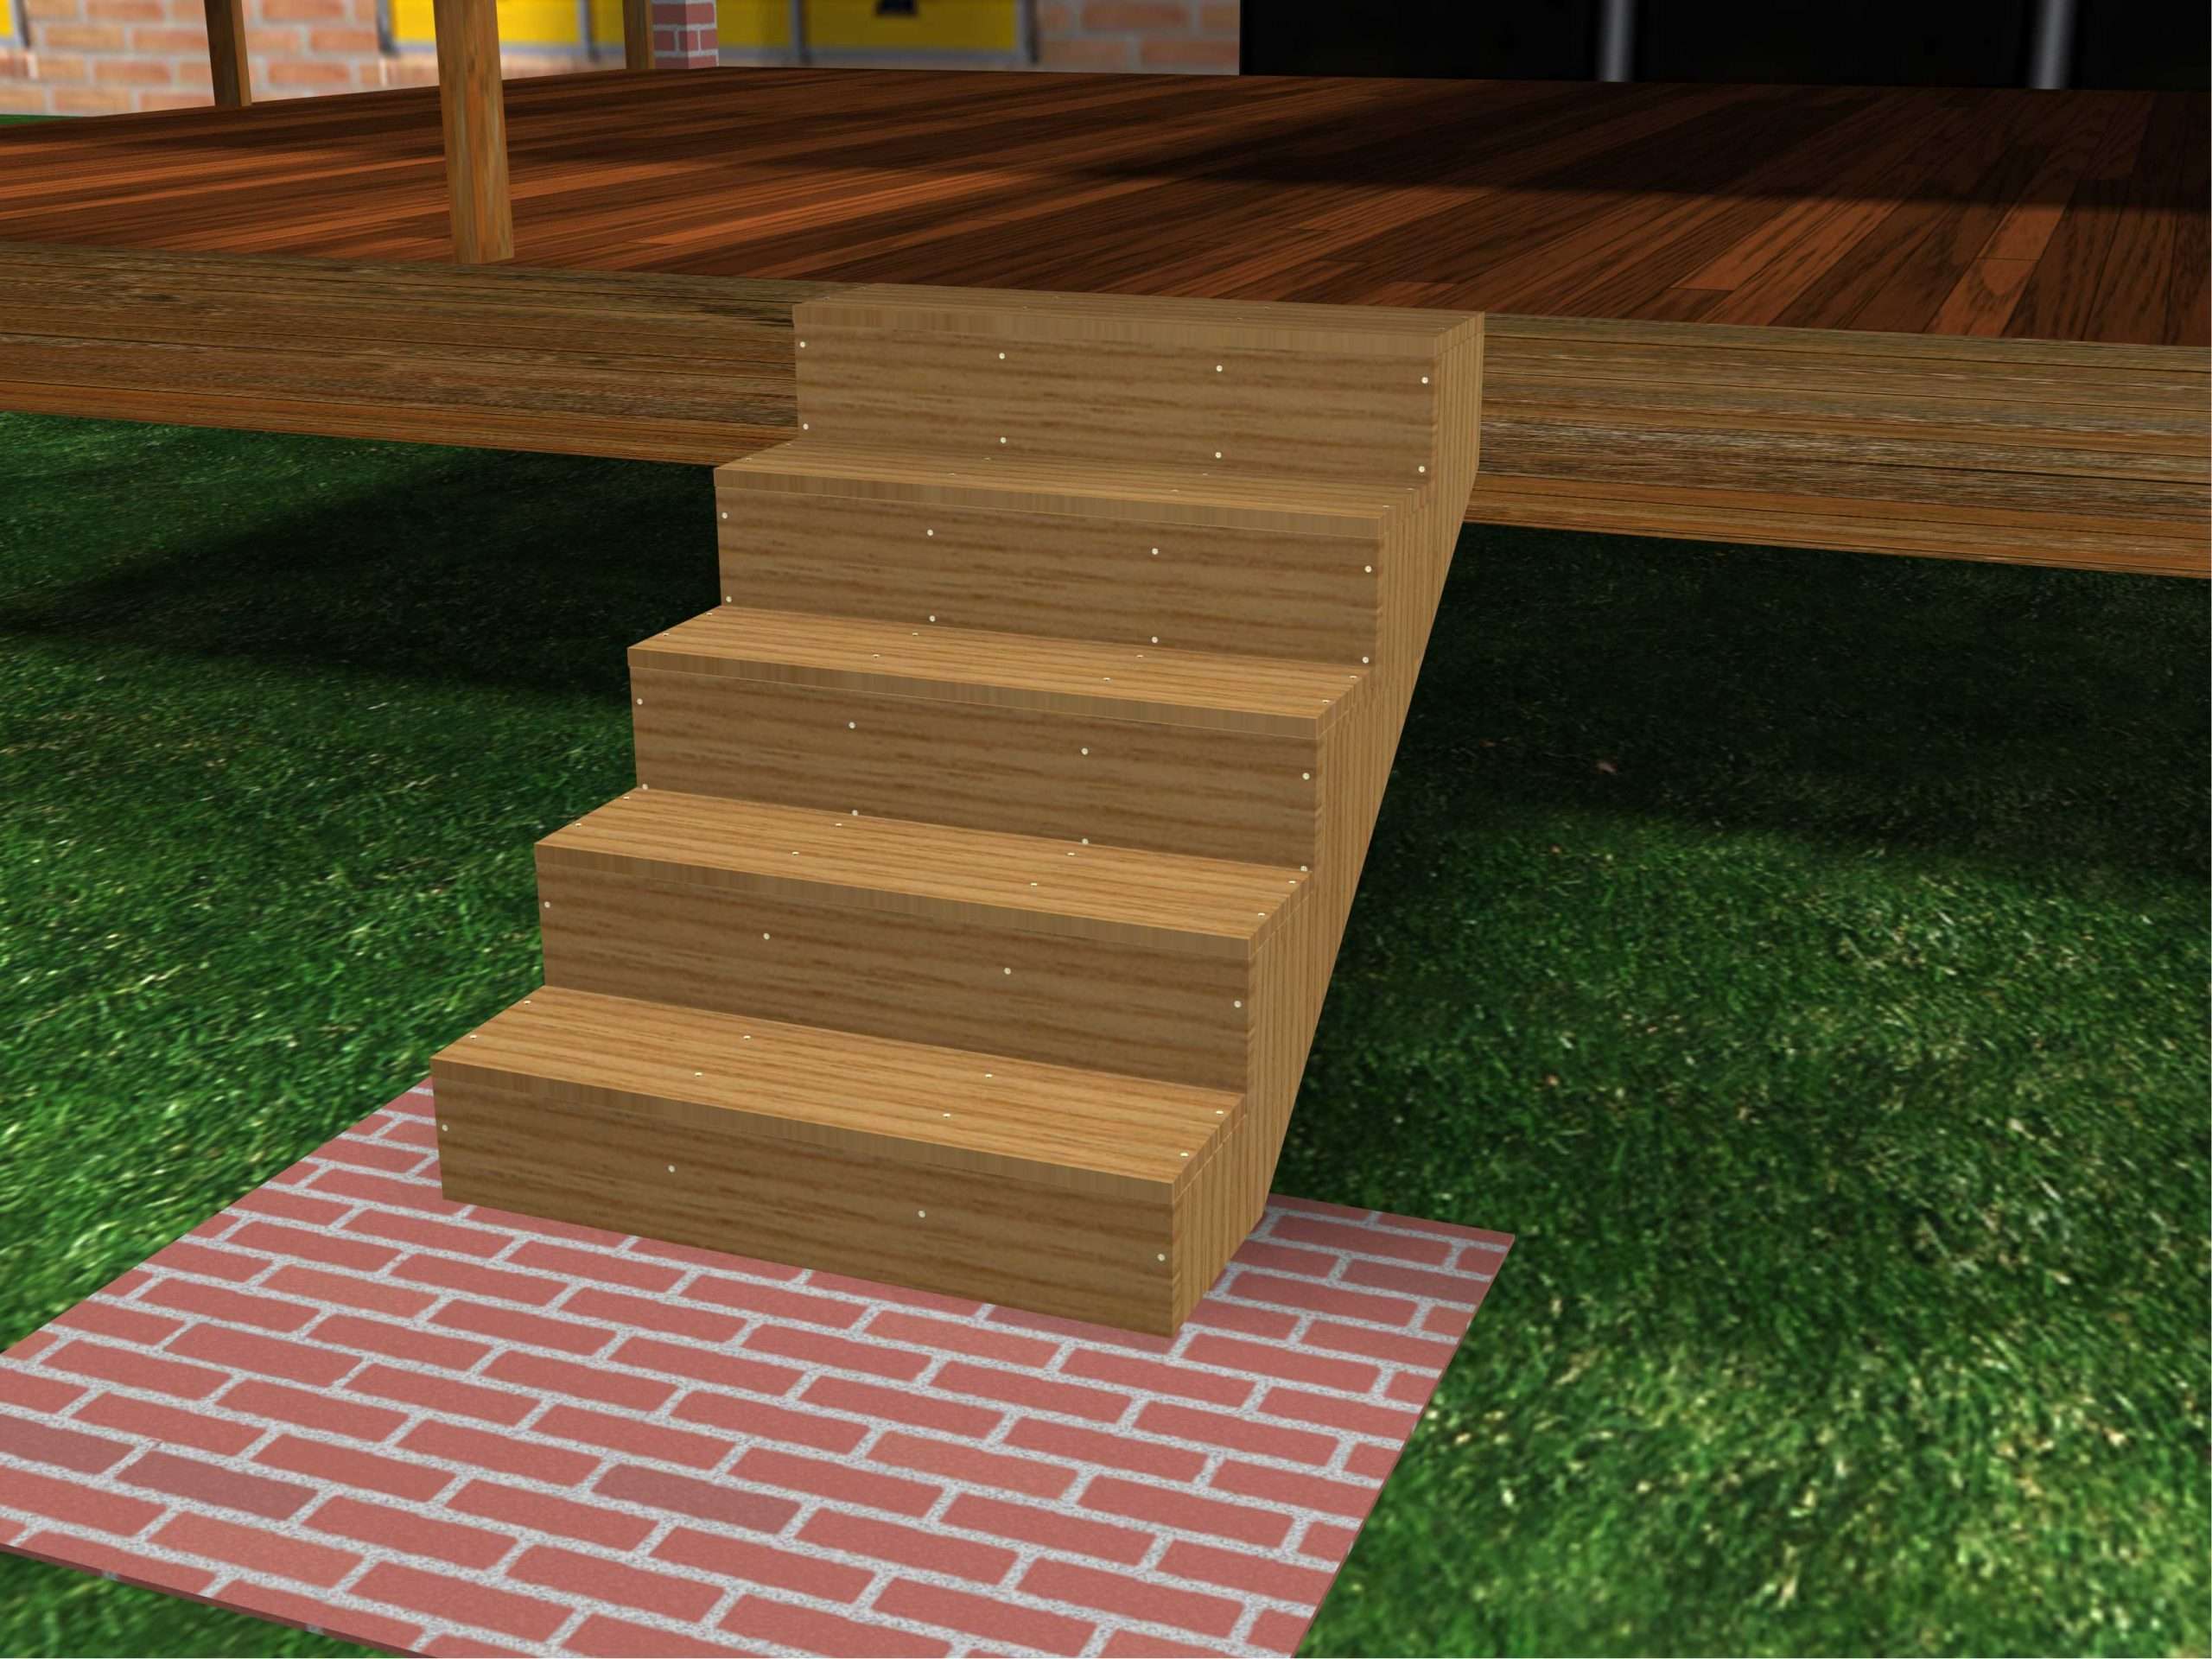 How to Build Porch Steps: 13 Steps (with Pictures)